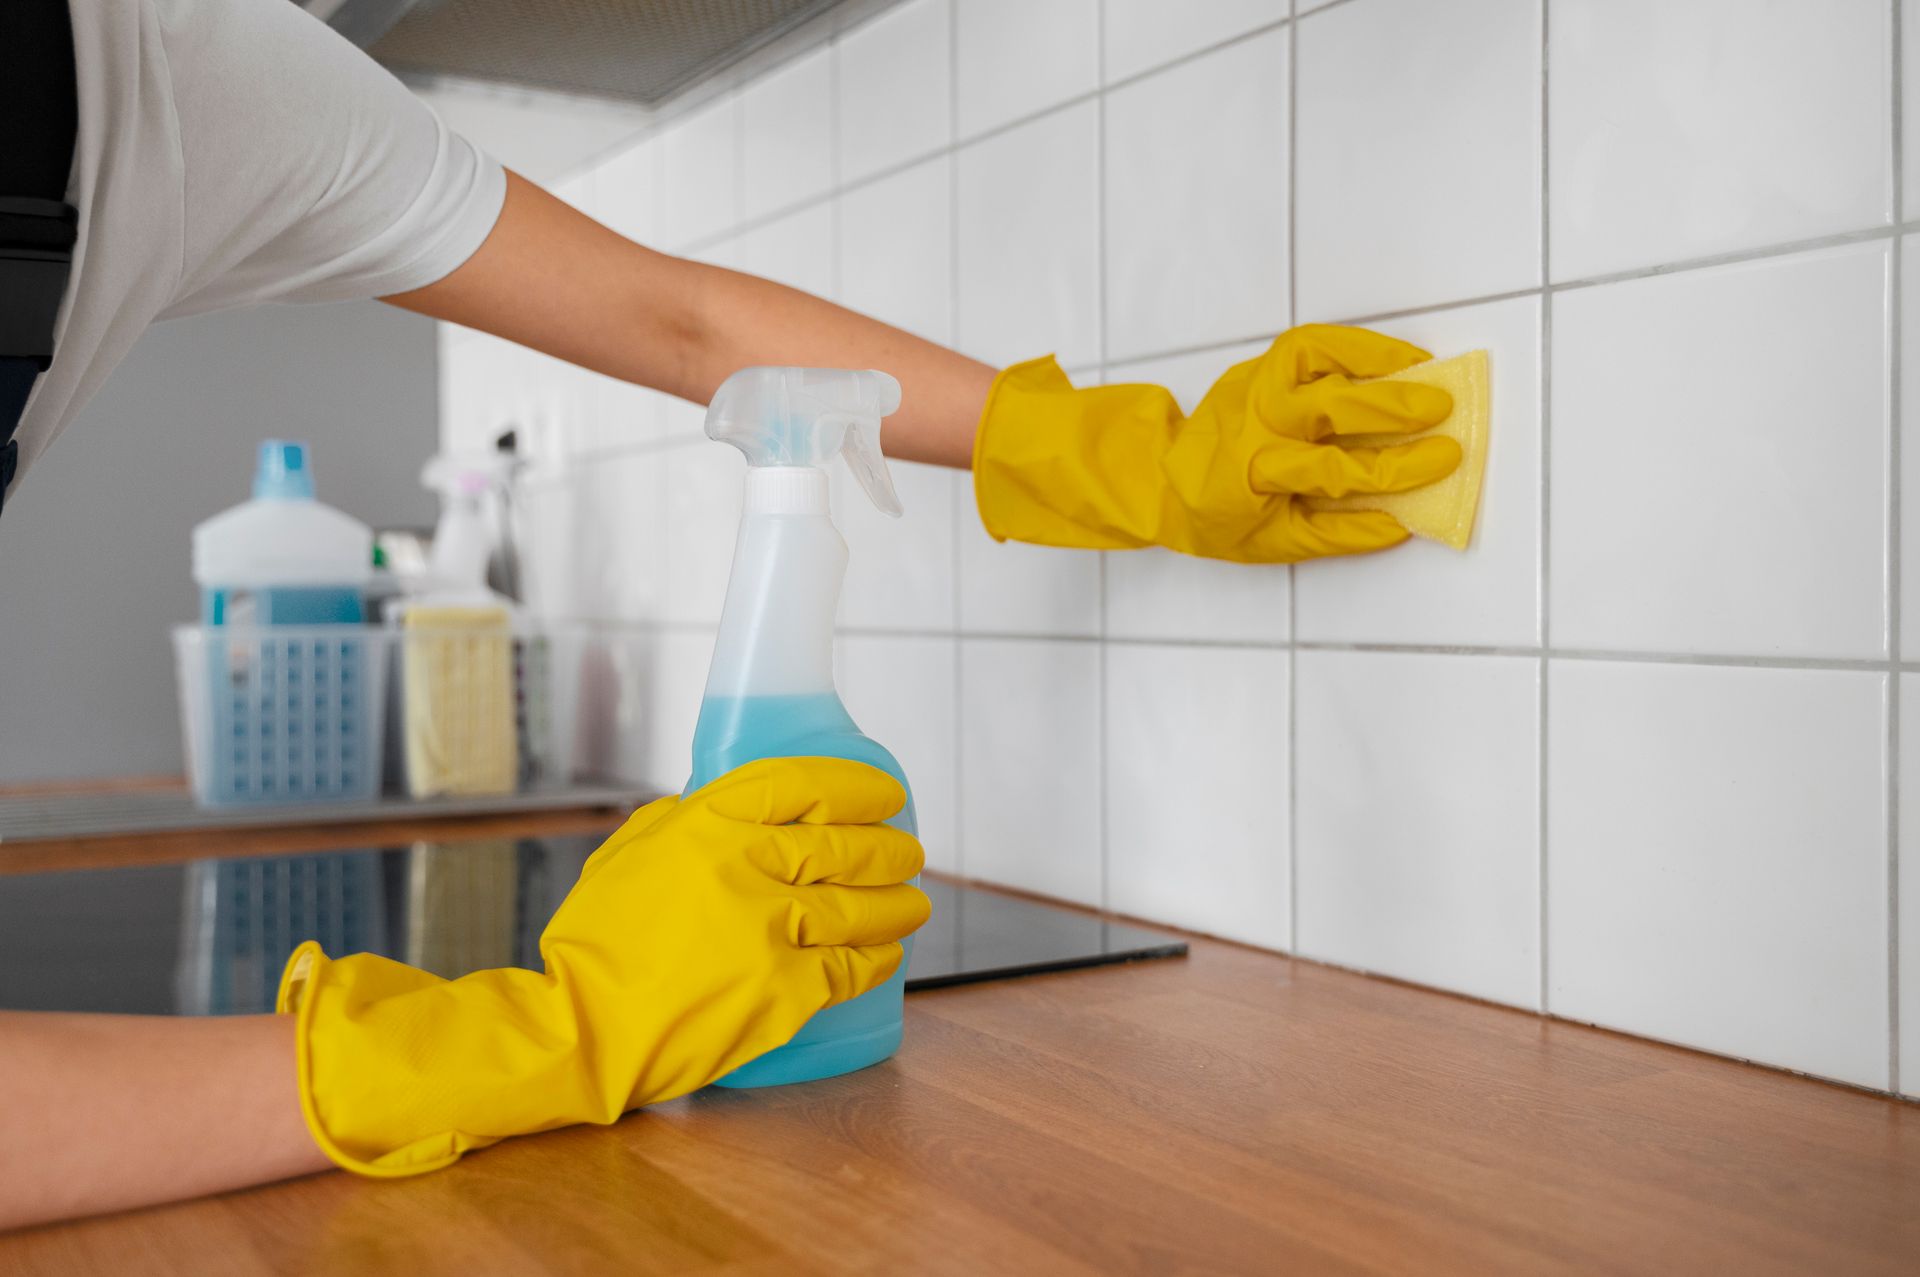 A person wearing yellow gloves is cleaning a tile wall in a kitchen.